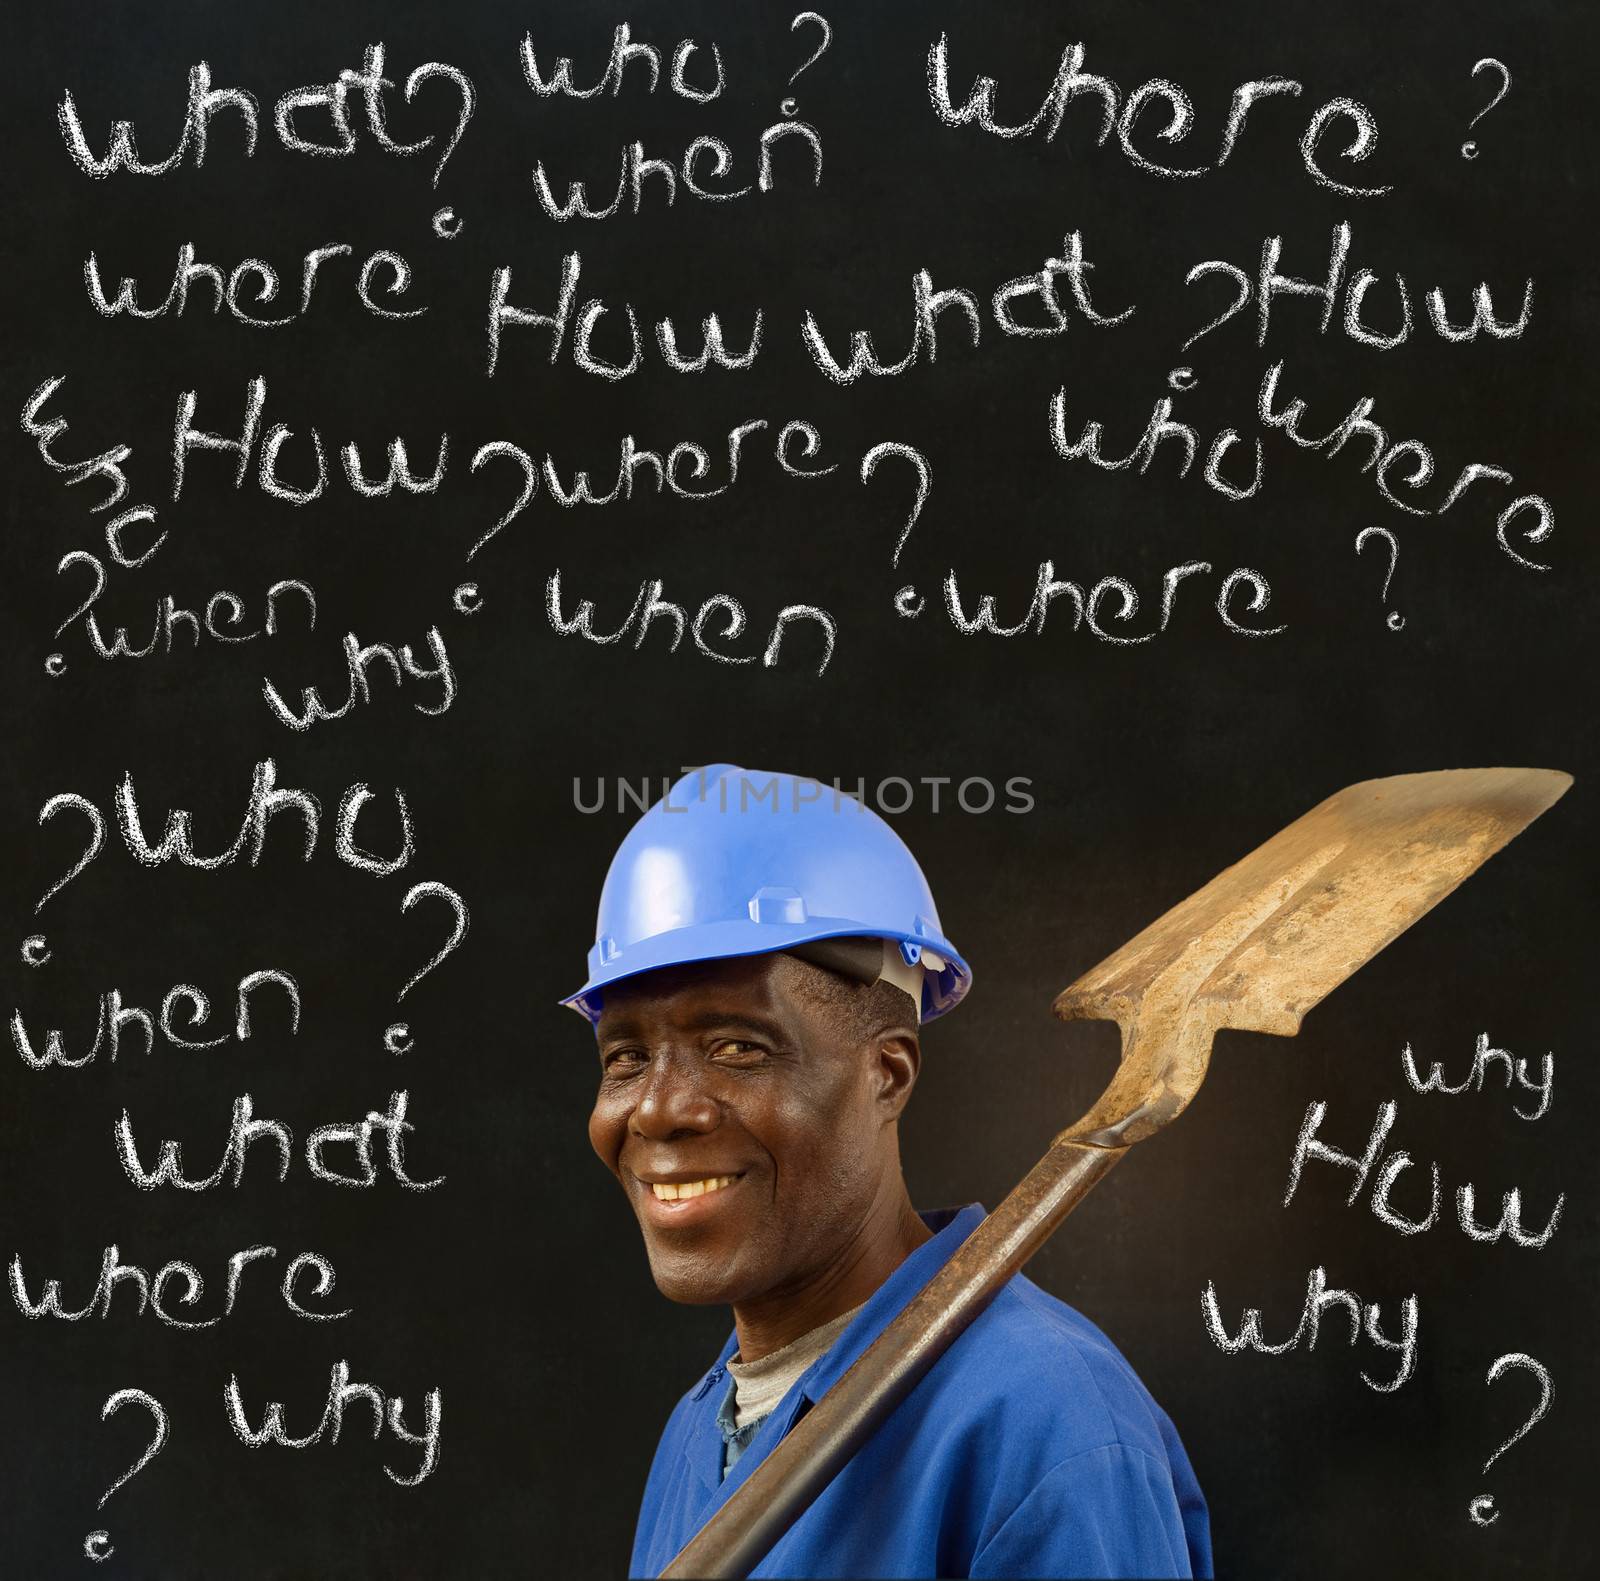 African American black man worker with chalk questions on a blackboard background